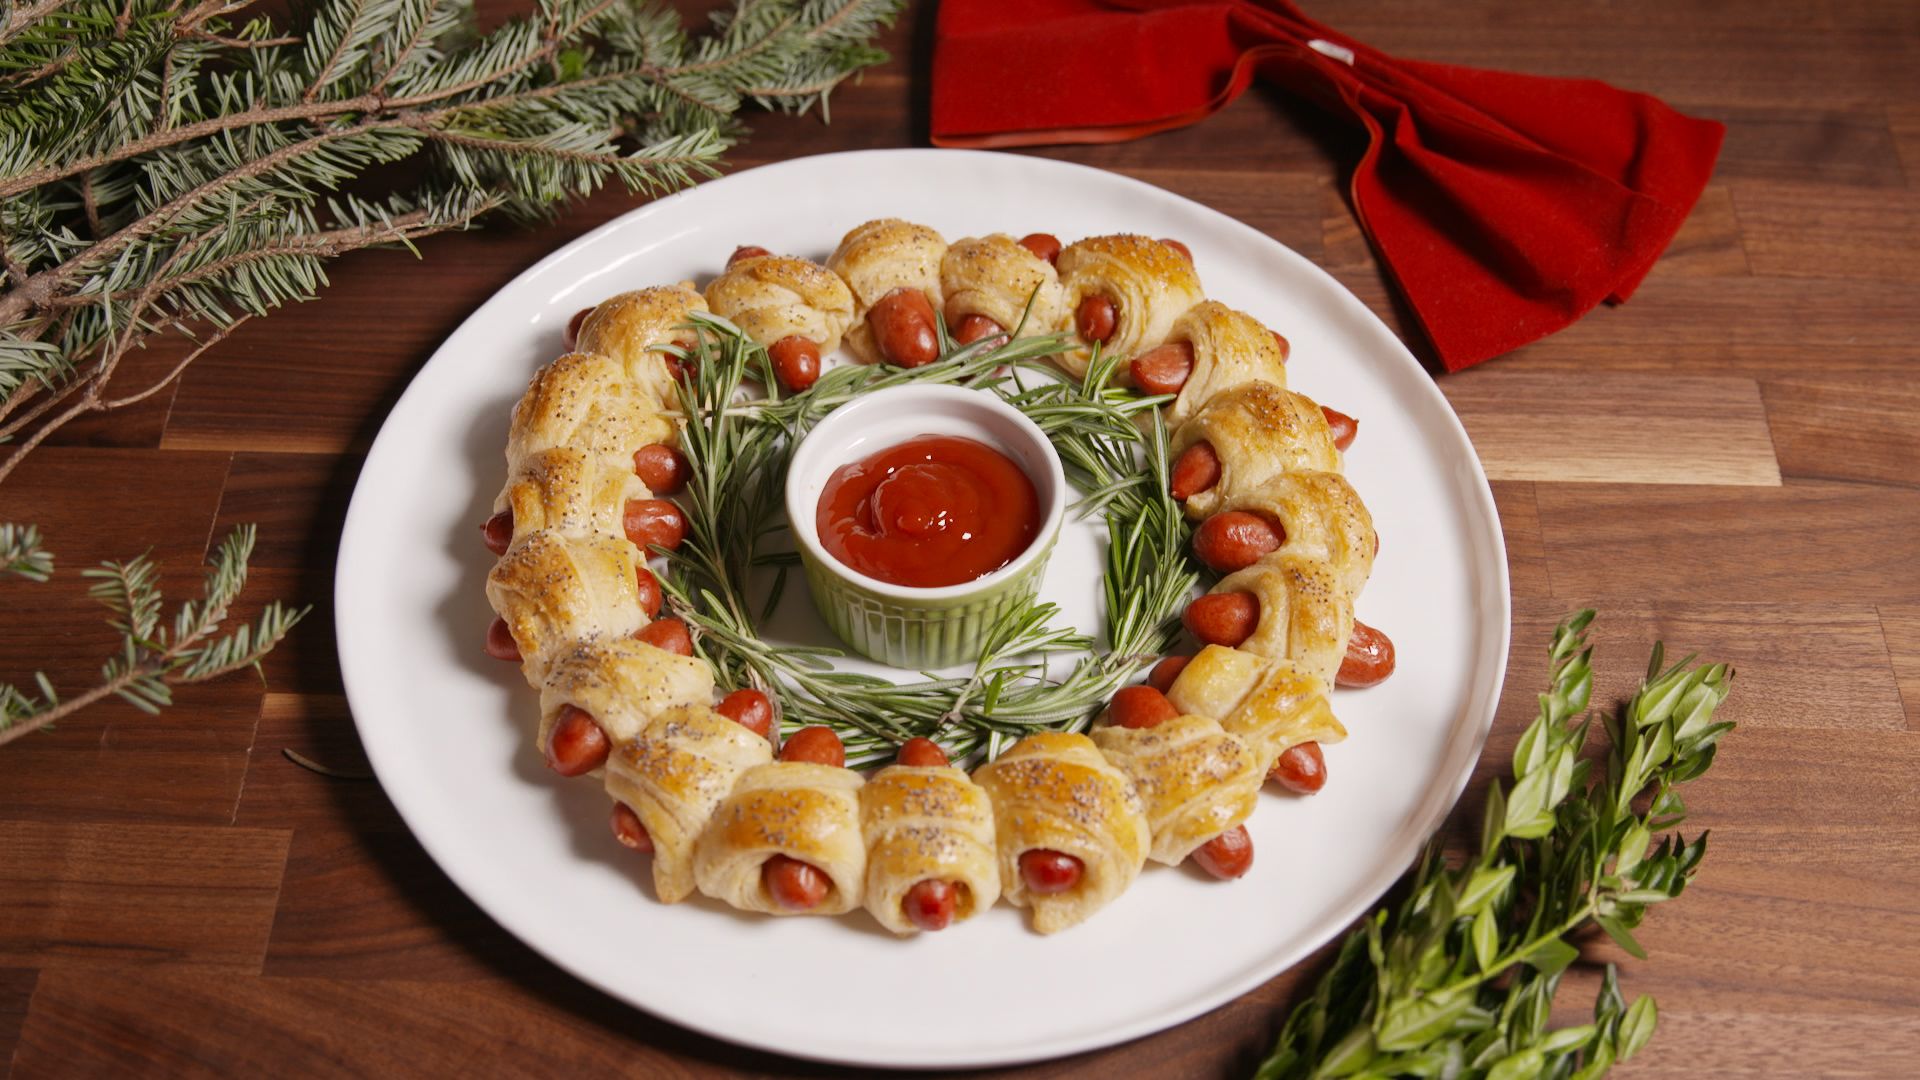 Best Pigs In A Blanket Wreath Recipe How To Make Pigs In A Blanket Wreath Delishcom